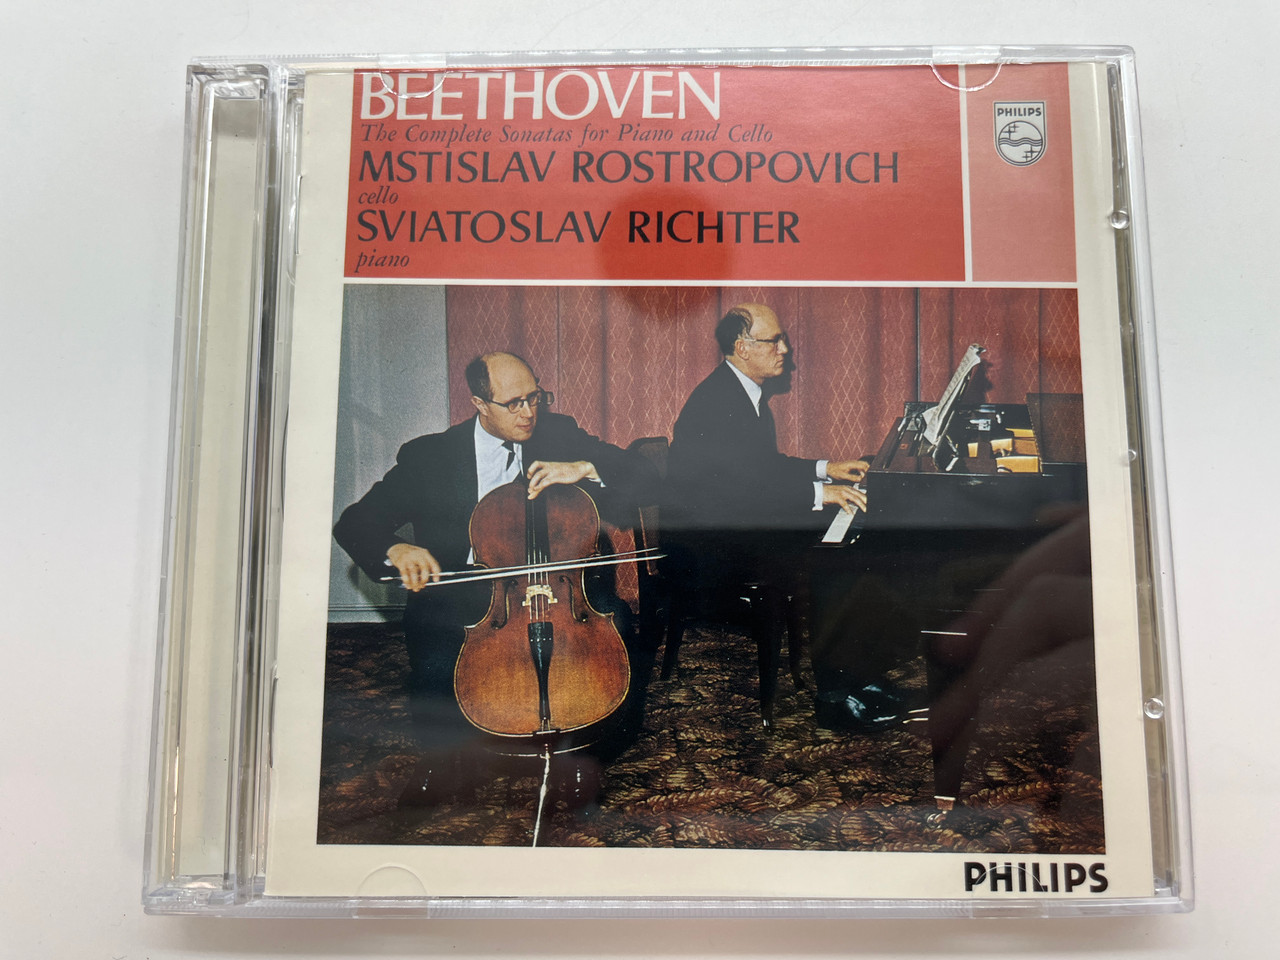 https://cdn11.bigcommerce.com/s-62bdpkt7pb/products/0/images/331810/Beethoven_The_Complete_Sonatas_for_Piano_and_Cello_-_Mstislav_Rostropovich_cello_Sviatoslav_Richter_piano_Philips_2x_Audio_CD_Stereo_1963_PHCP-203545_1__57254.1713896520.1280.1280.JPG?c=2